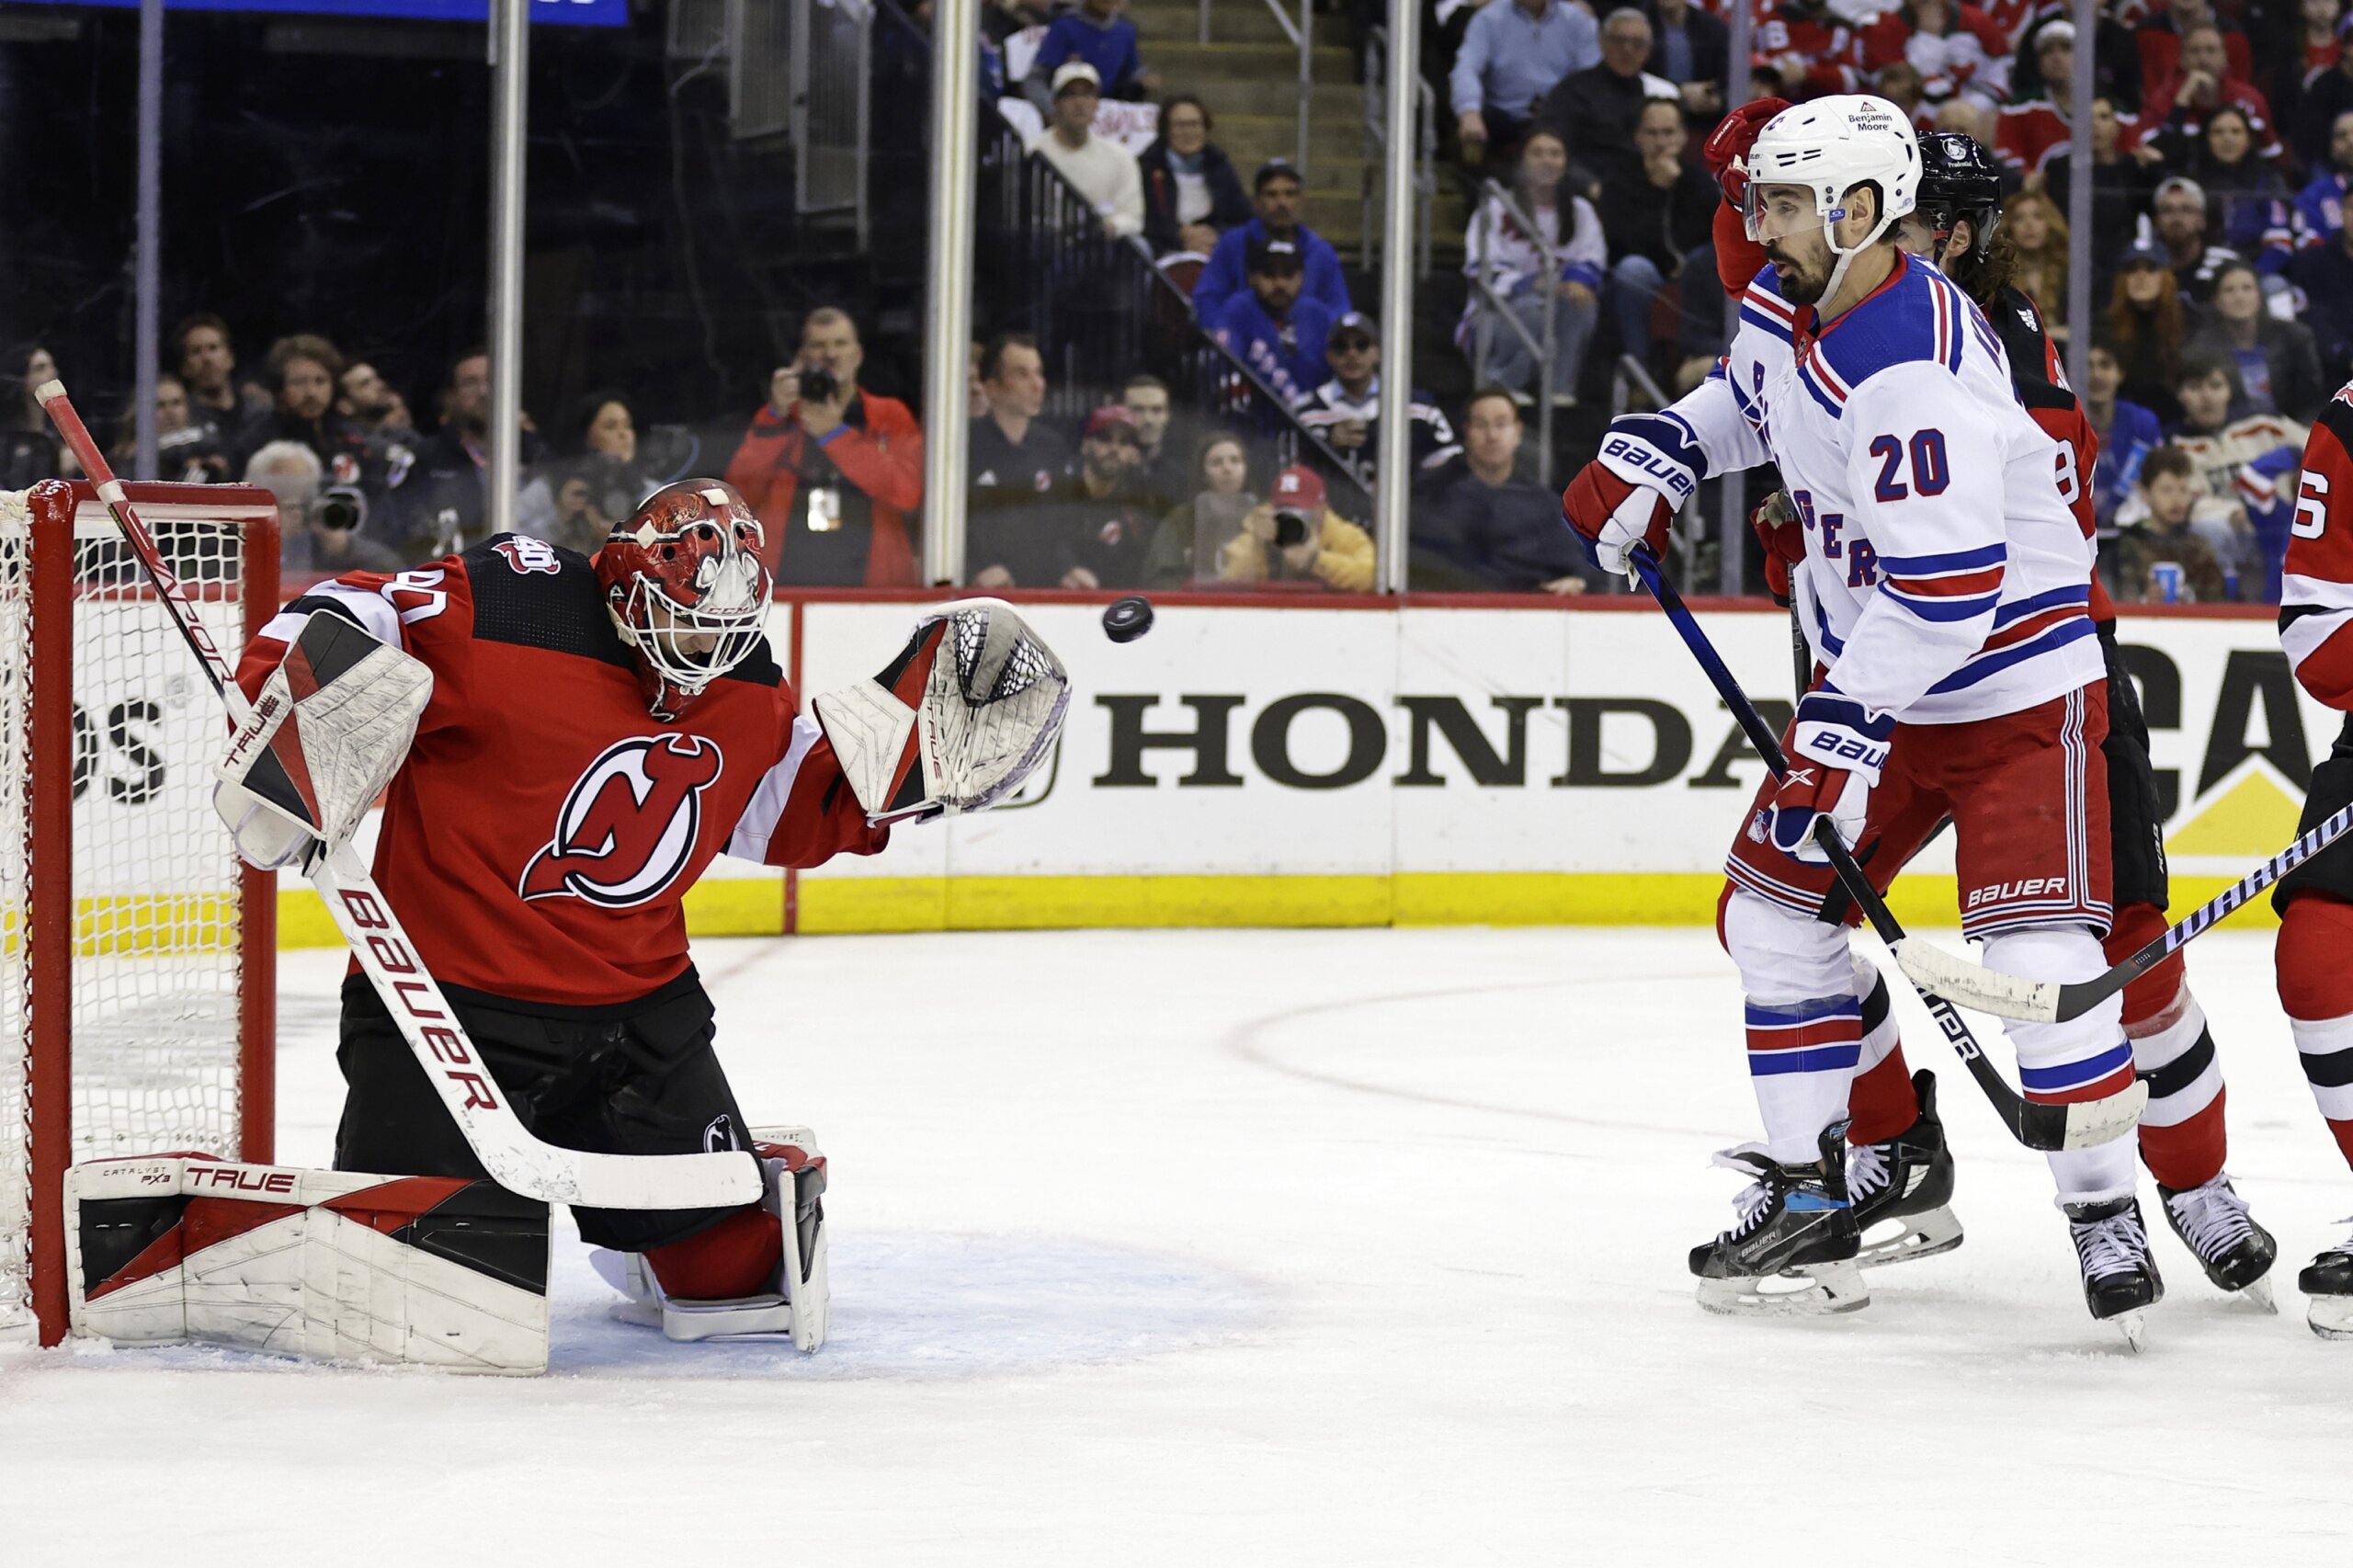 Devils shut out Rangers to win Game 7, move on to face Hurricanes